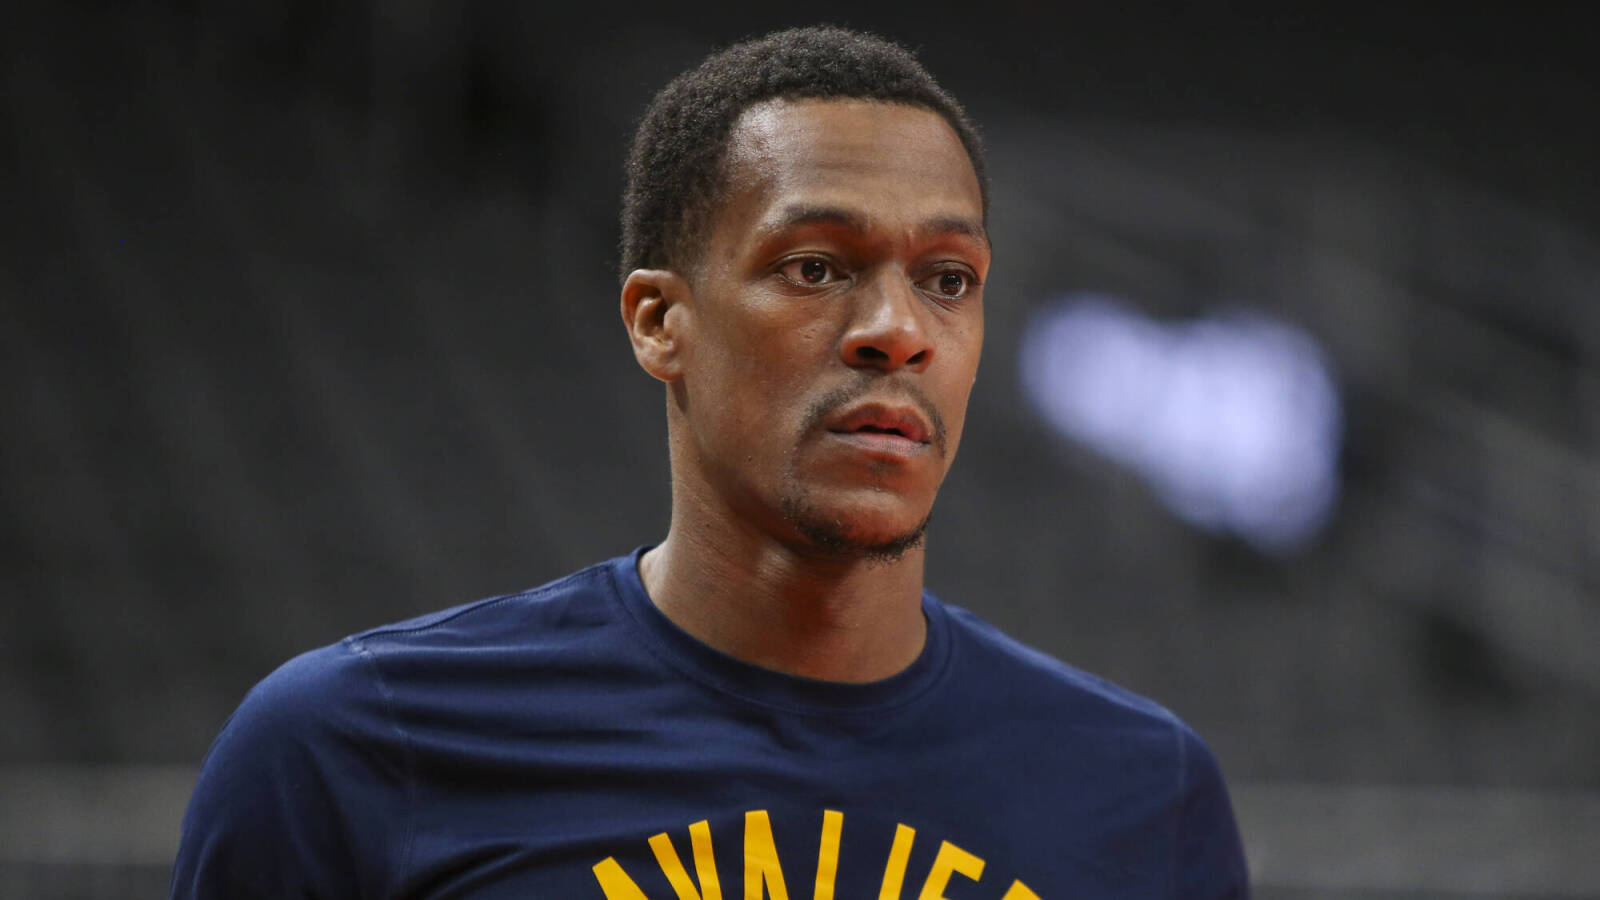 Rajon Rondo faces troubling allegations of abuse of girlfriend, children